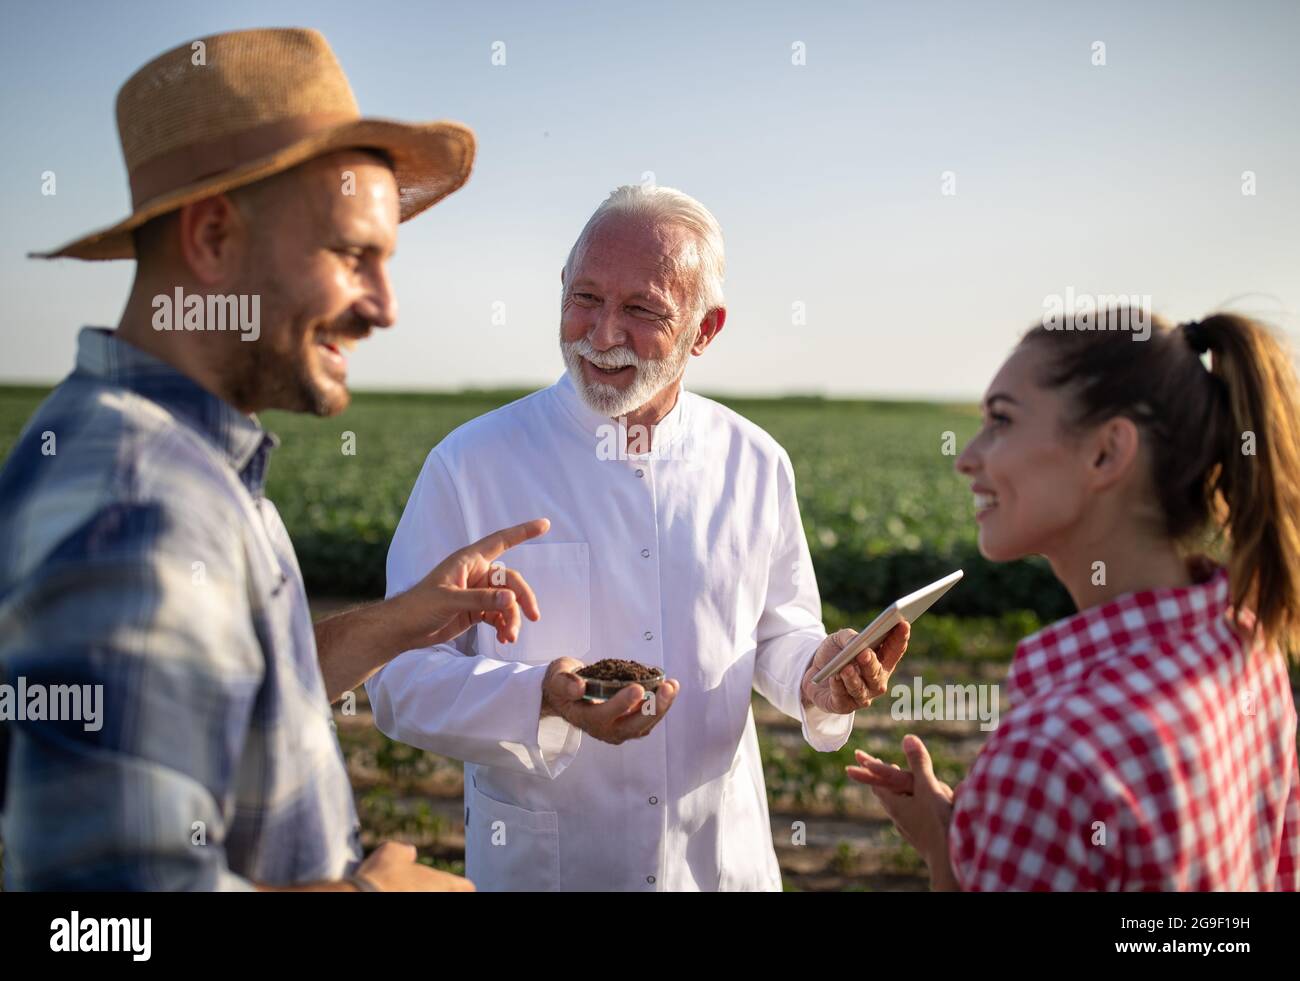 Couple young farmers discussing soil quality standing in field smiling. Elderly scientist wearing laboratory coat using tablet and petri dish with soi Stock Photo